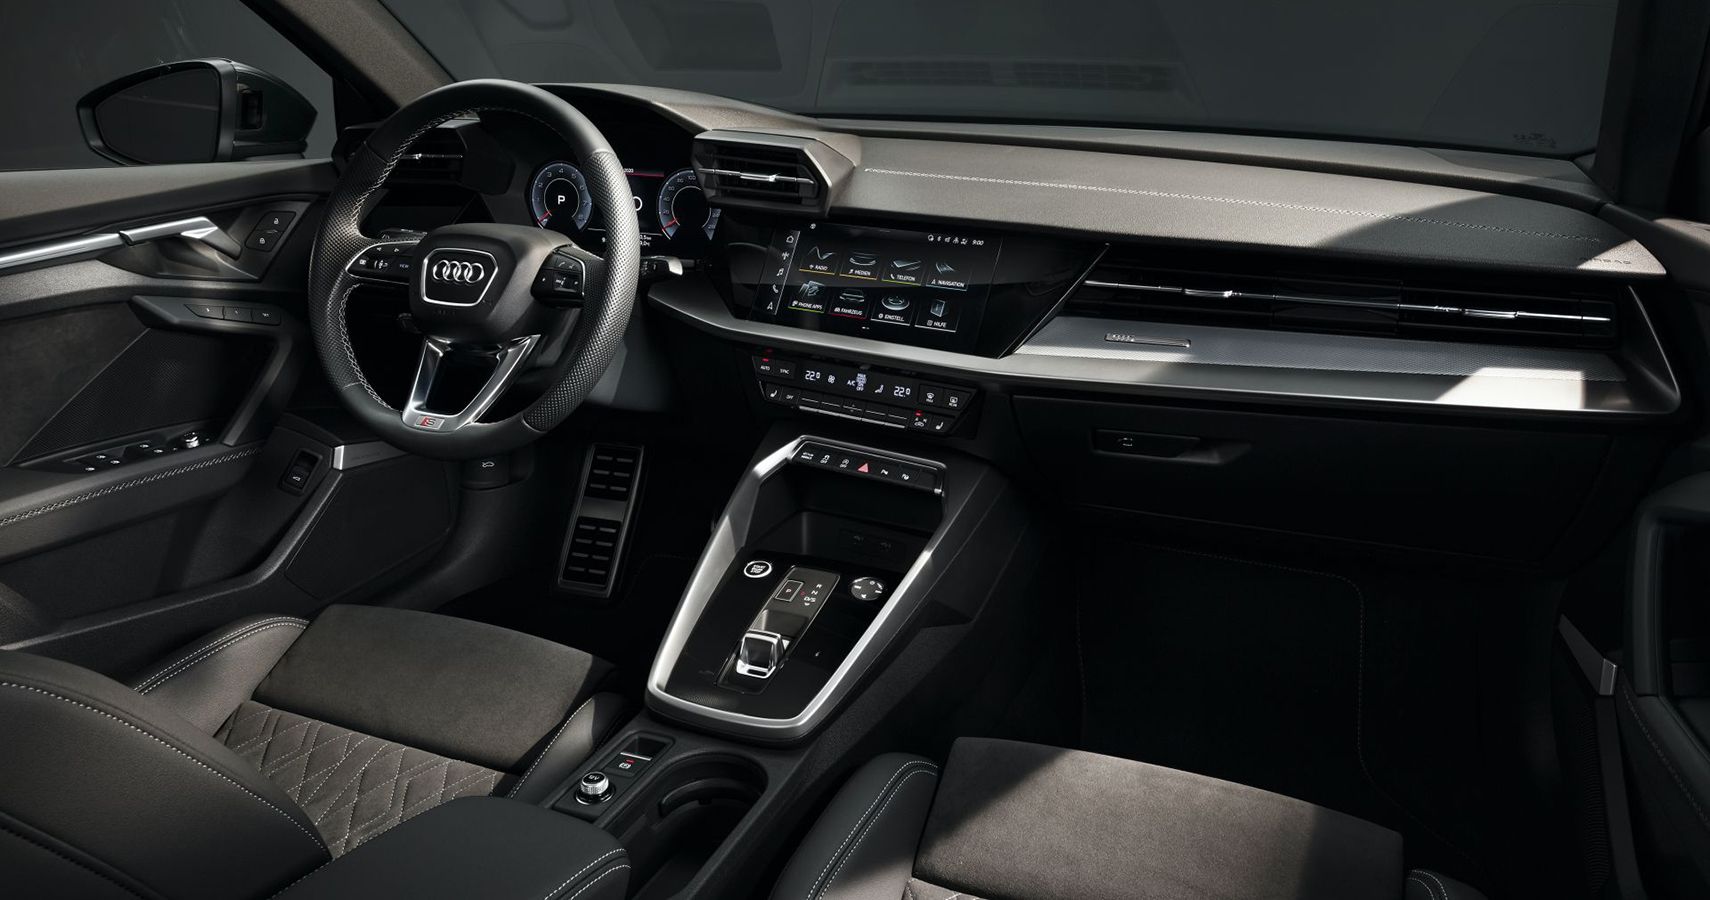 The A3’s Styling Is Now More Staid From The Inside, Taking Cues From The Larger A4 Sedan With A Little More Personality